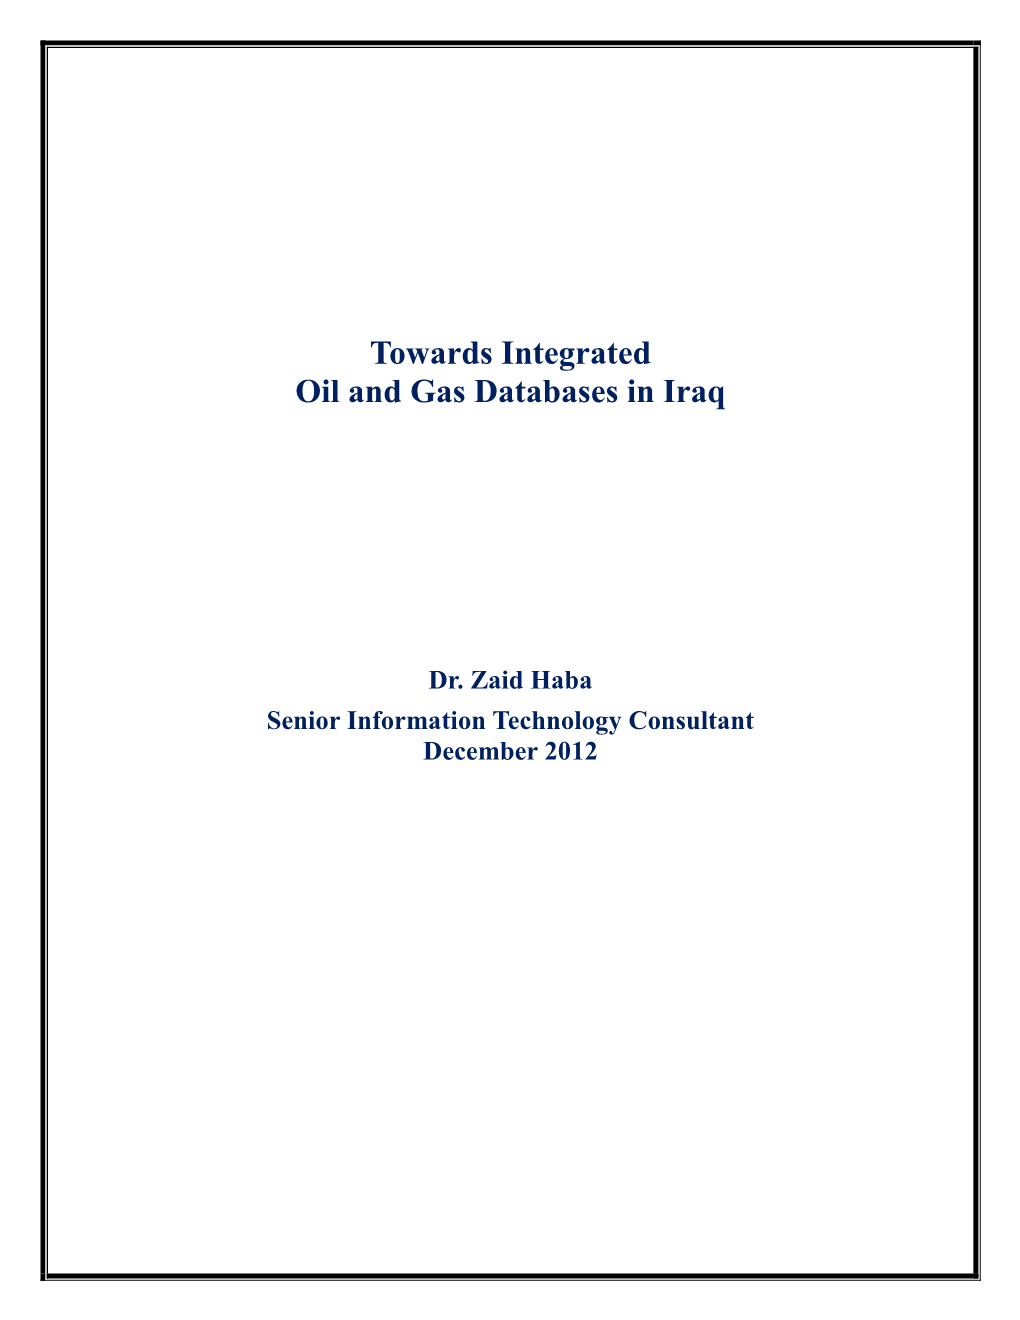 Towards Integrated Oil and Gas Databases in Iraq